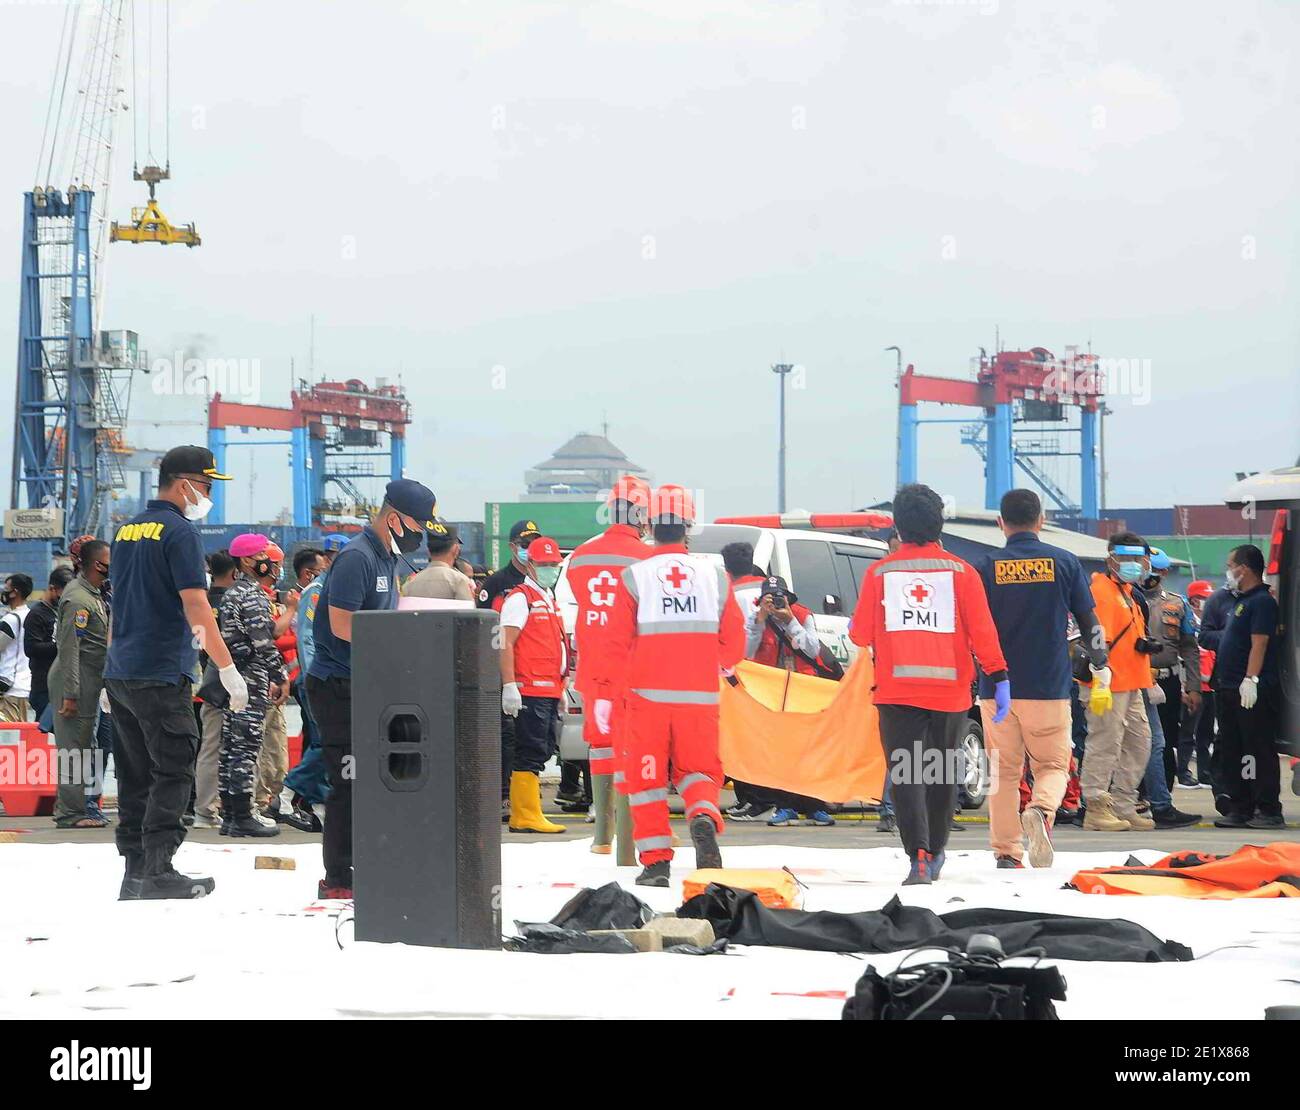 Indonesian Disaster Victim Identification (DVI) officers check remains including body parts recovered during the search operation of the wreckage of Sriwijaya Air plane SJ182, at Jakarta port, Indonesia, 10 January 2021. Remains of the aircraft along with human body found by search and rescue teams in the waters of the Thousand Islands. An Indonesian passenger aircraft with 62 people on board crashed into the sea after taking off from Jakarta, authorities said Saturday. The plane carried 50 passengers on board, including 10 children, plus 12 crew members. (Photo by Rahmat Dian Prasanto/INA P Stock Photo